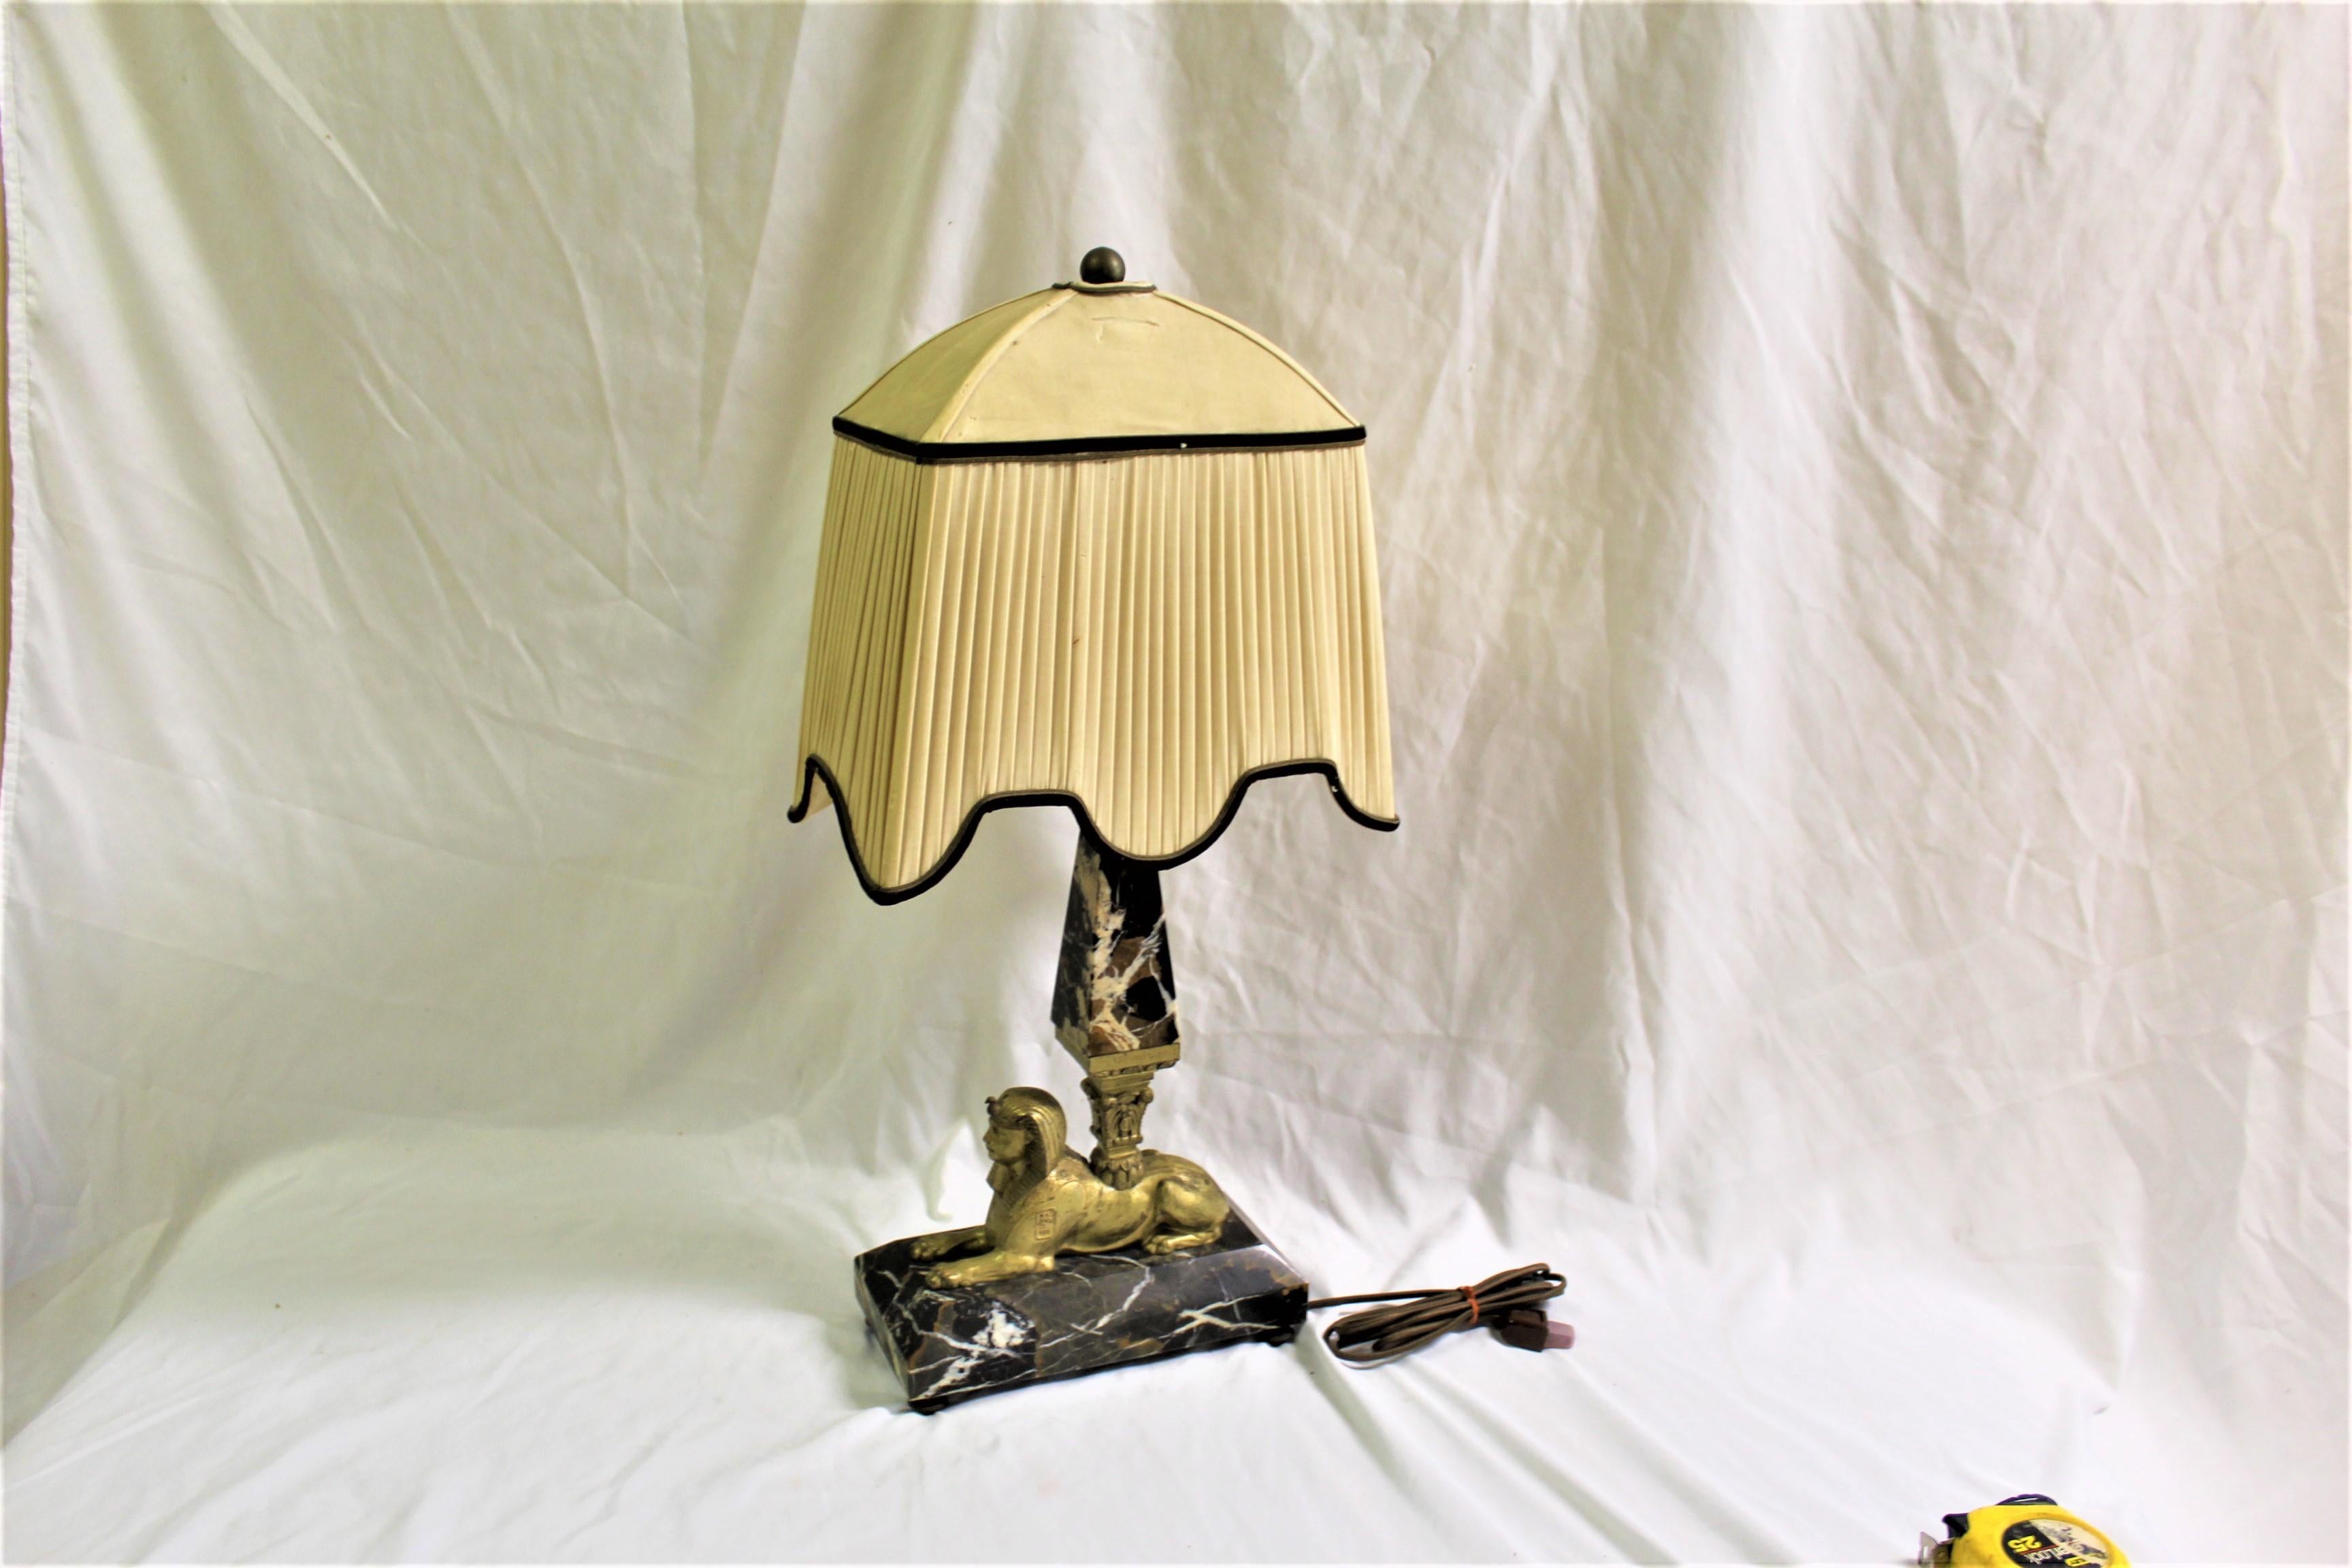 Lamp, Orignal Egyptian Revival, Sphynx, Tent Shade, Orignal Marble Base In Good Condition For Sale In Los Angeles, CA